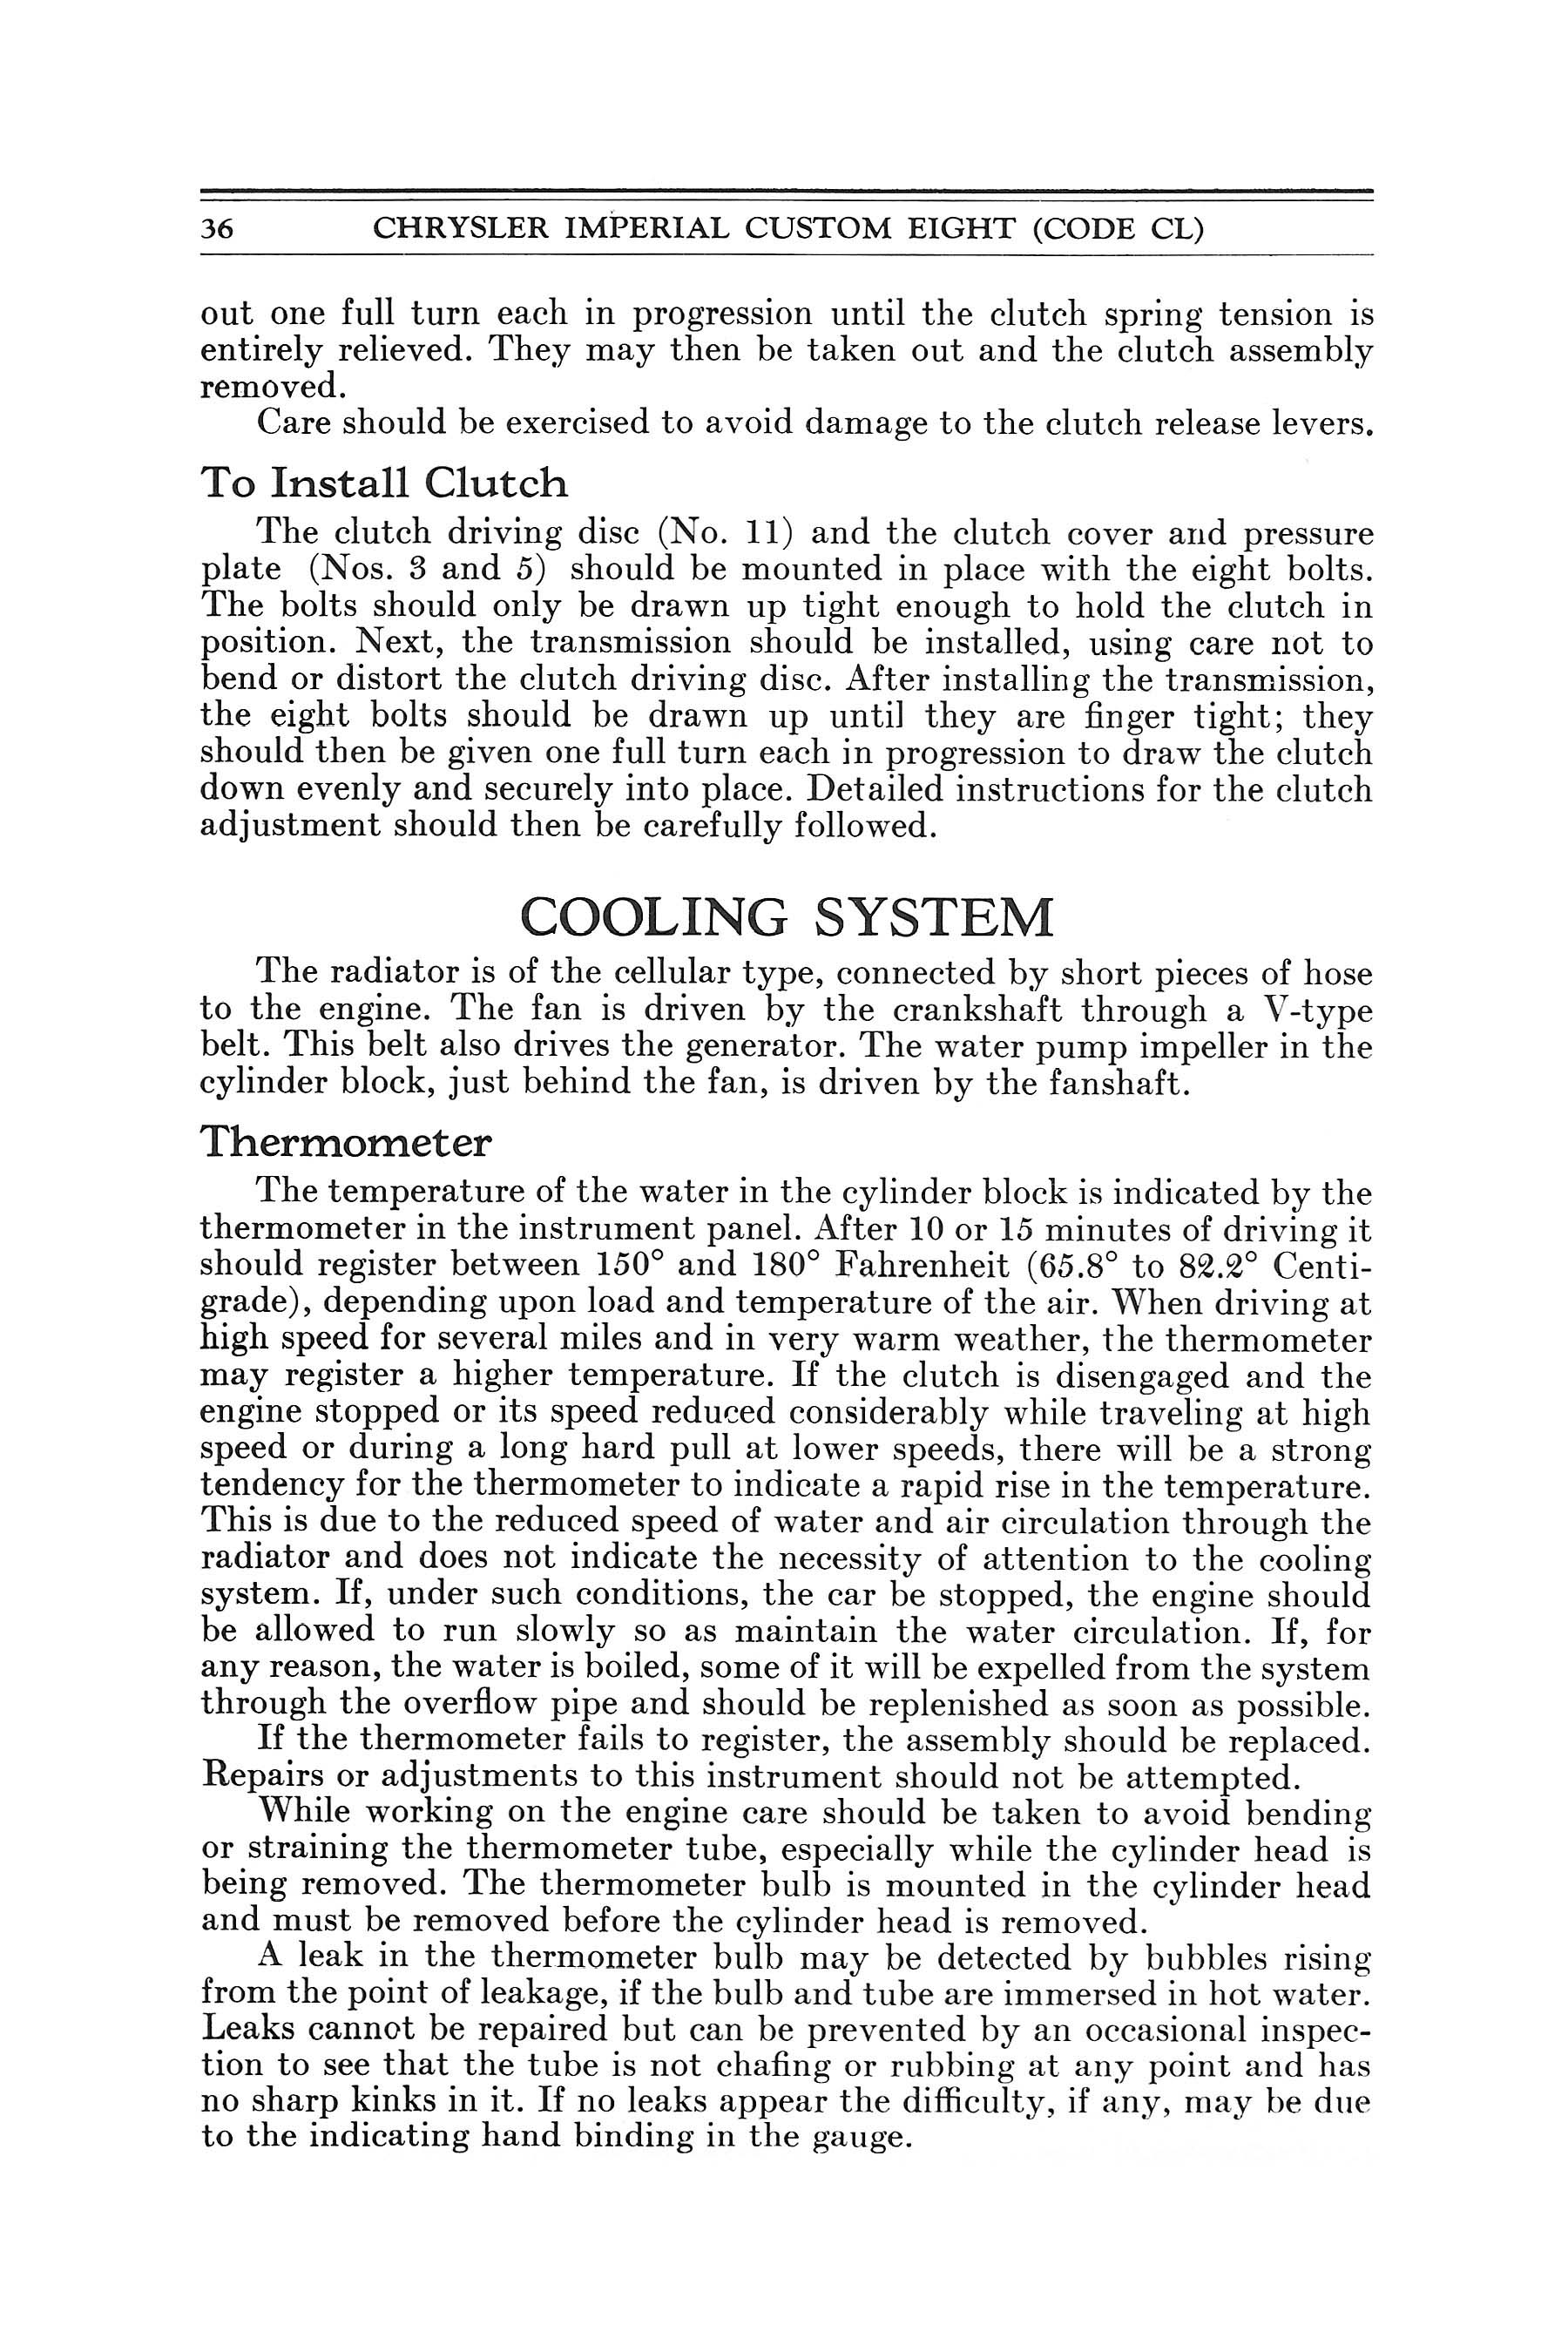 1932_Imperial_Instruction_Book-036